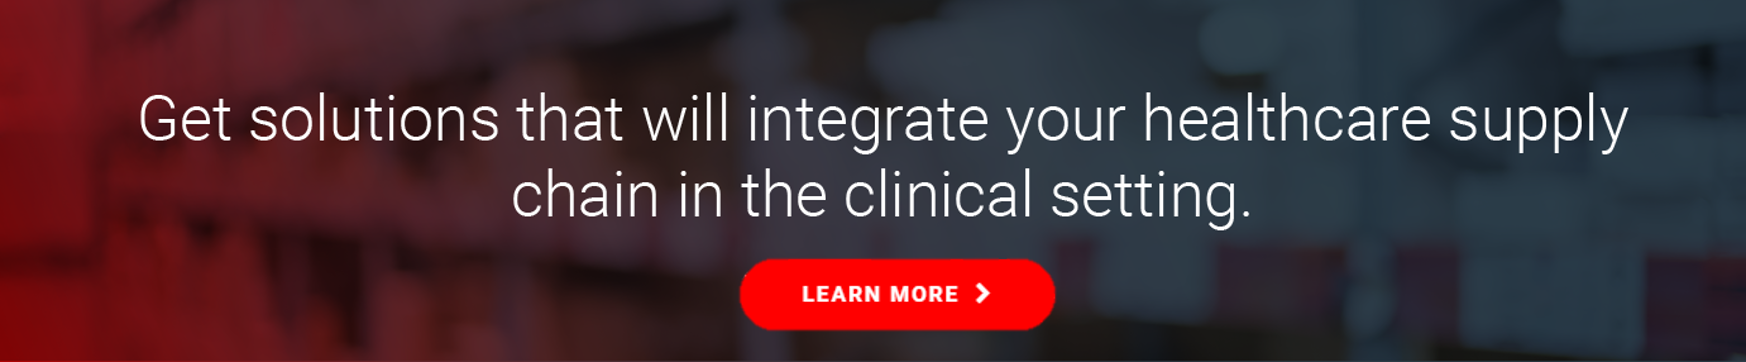 Get solutions that will integrated your healthcare supply chain in the clinical setting